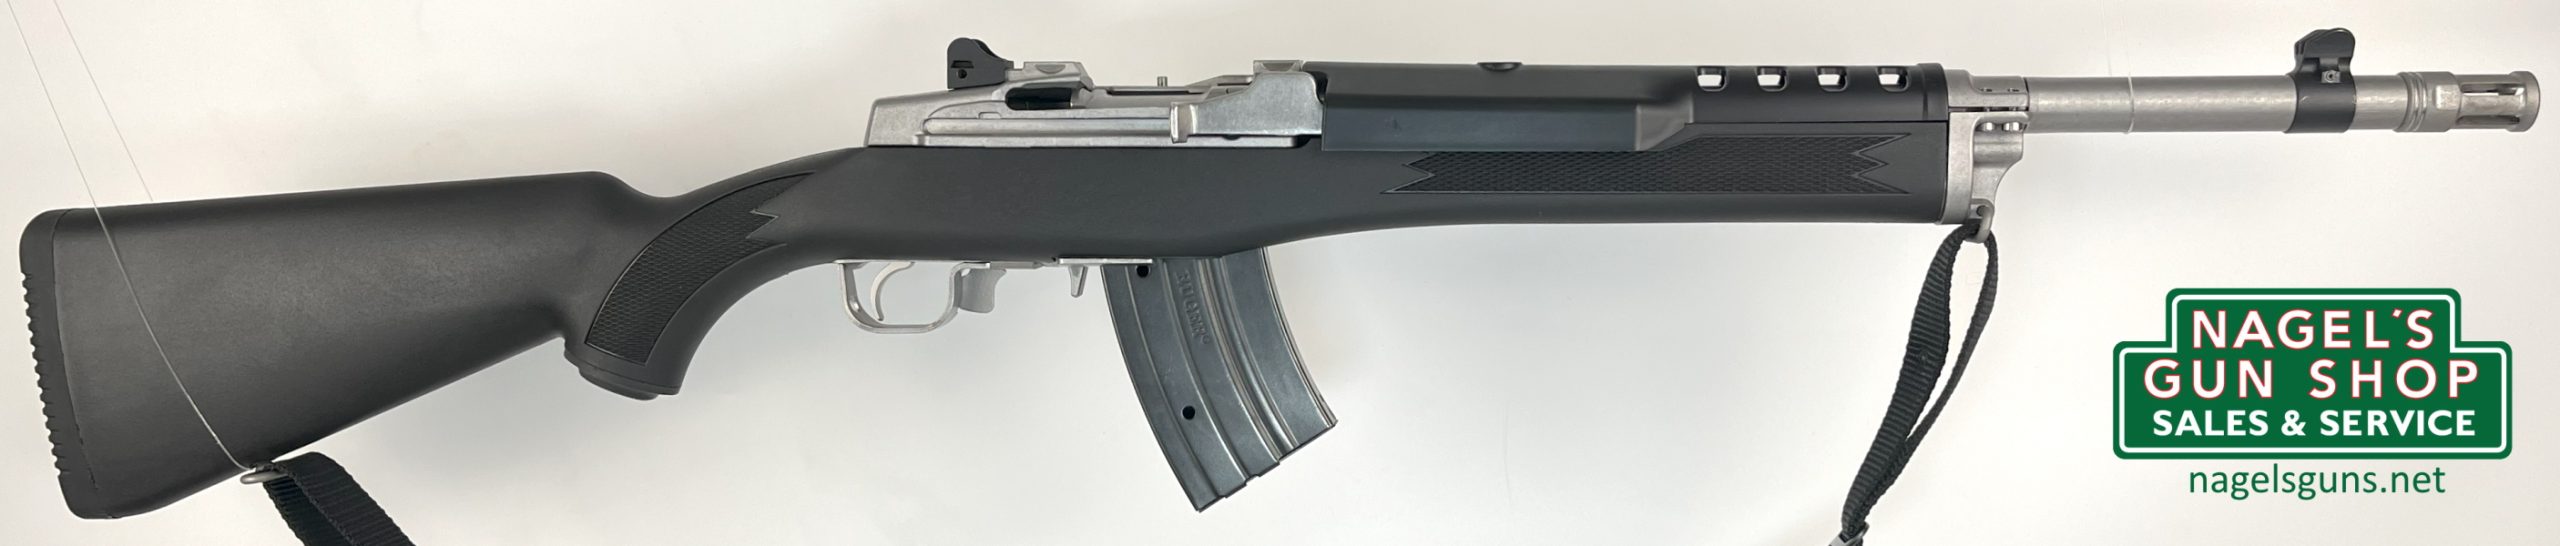 Ruger Mini-30 Tactical Stainless 7.62x39mm Rifle